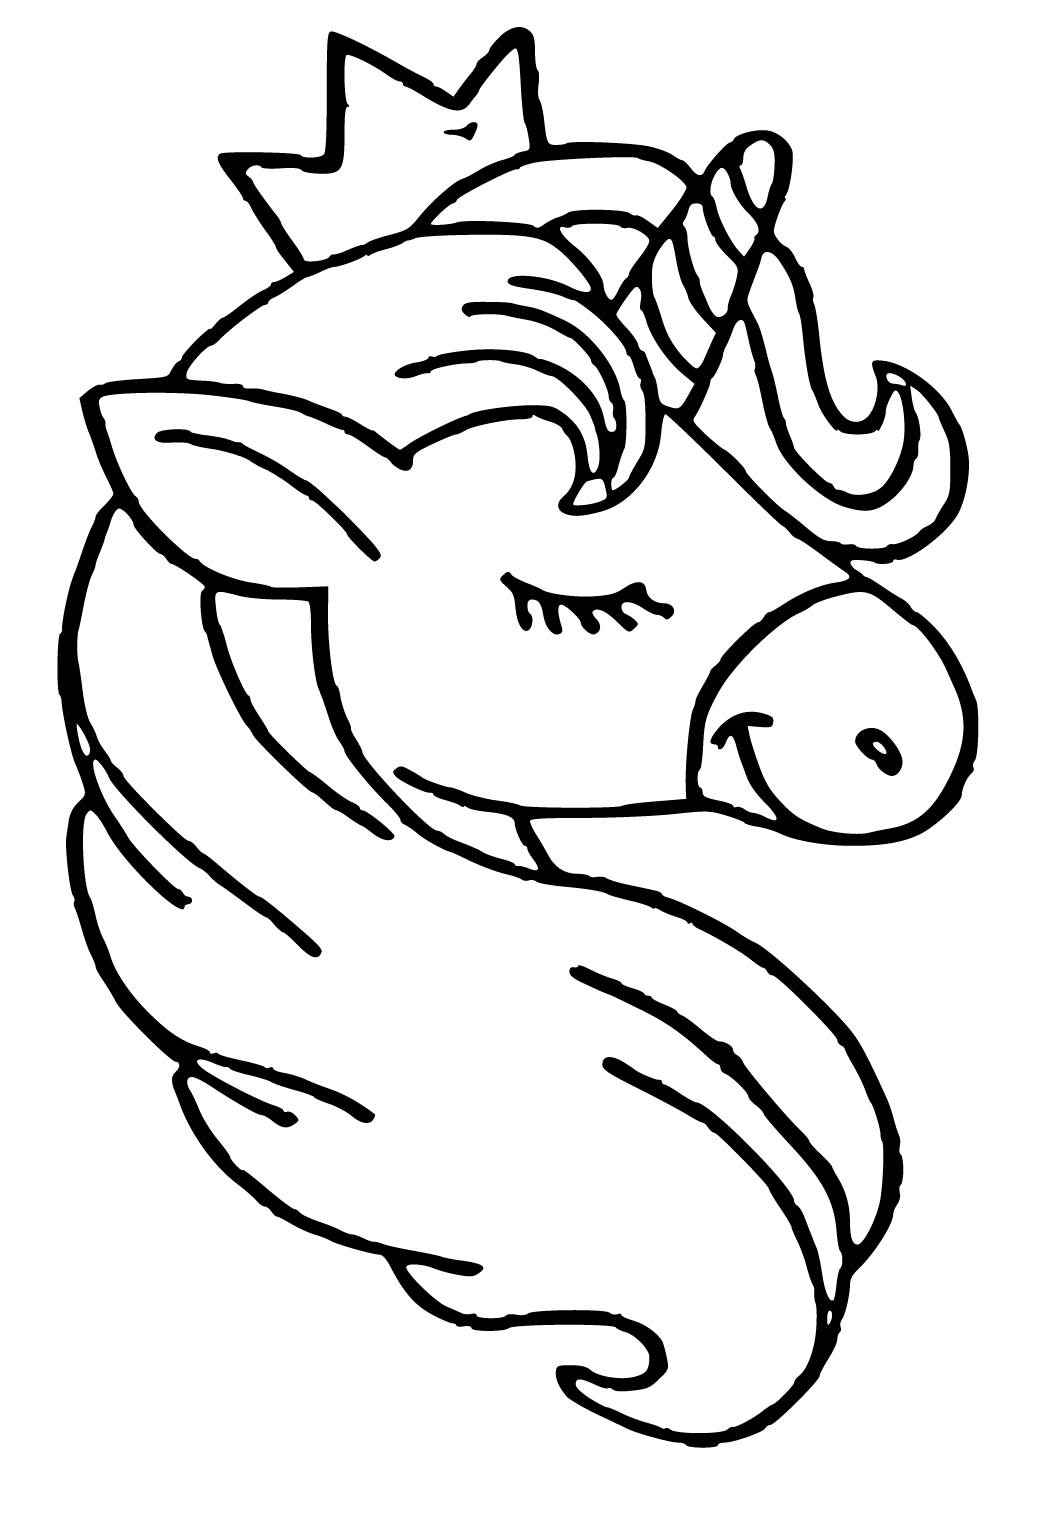 Free printable unicorn emoji coloring page sheet and picture for adults and kids girls and boys